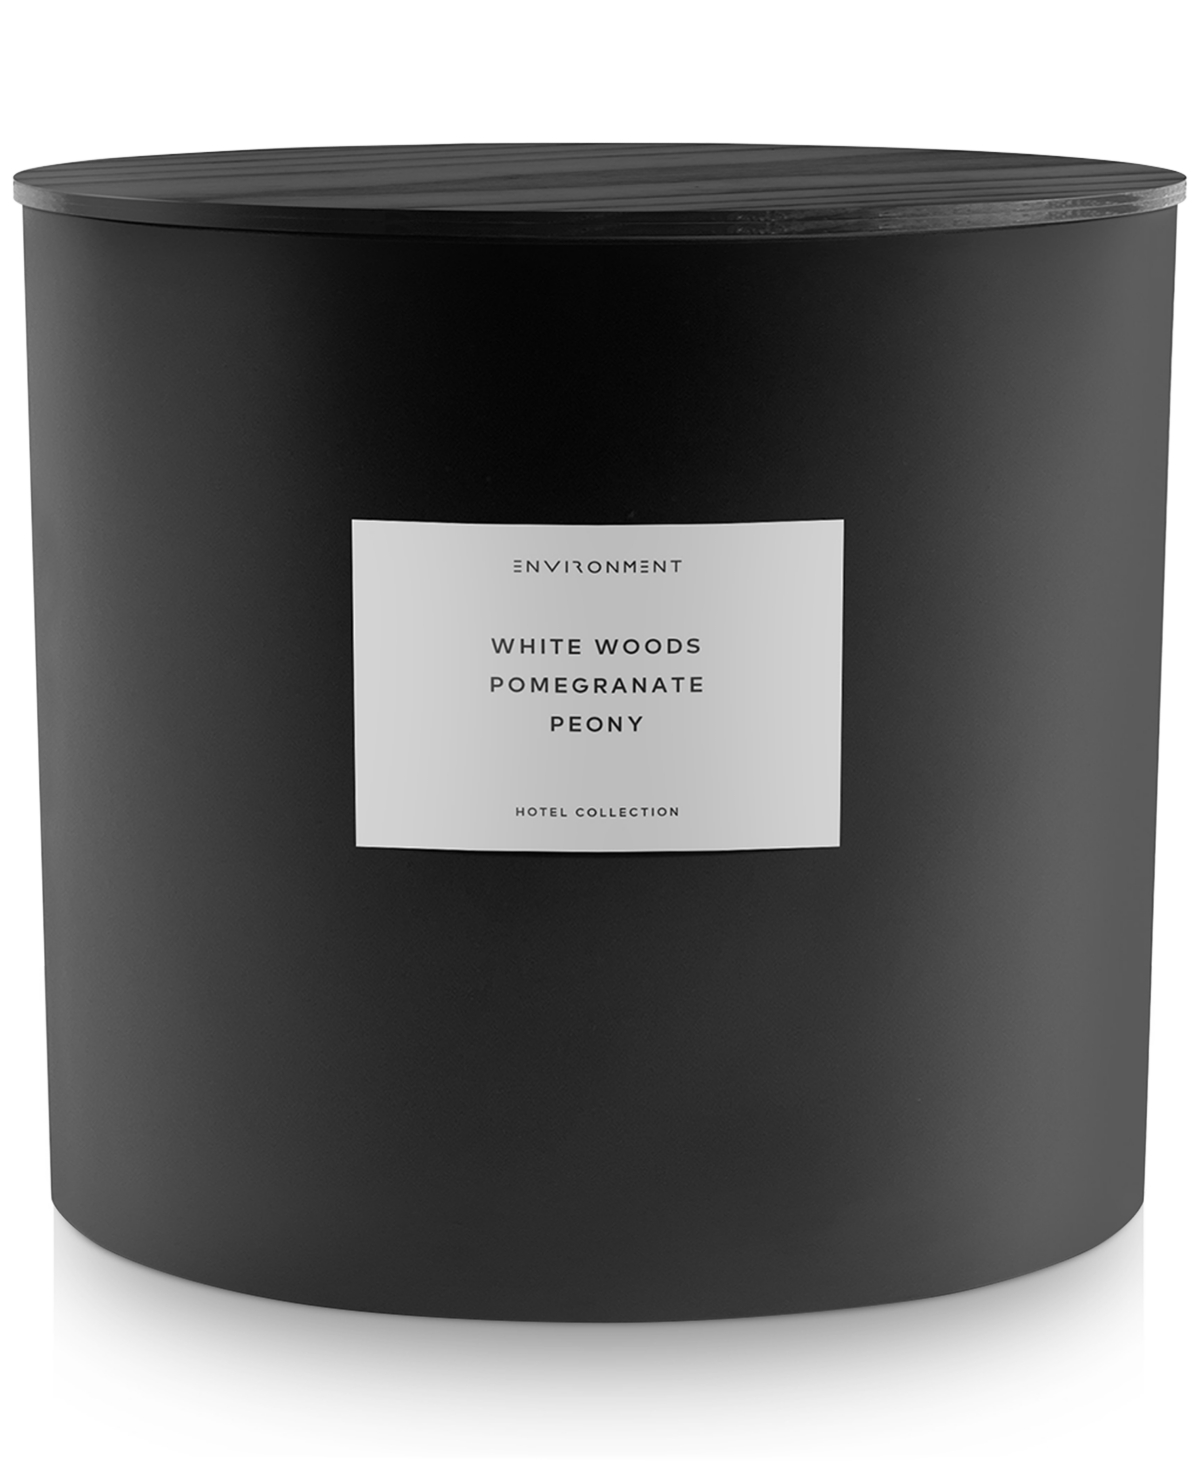 White Woods, Pomegranate & Peony Candle (Inspired by 5-Star Hotels), 55 oz.